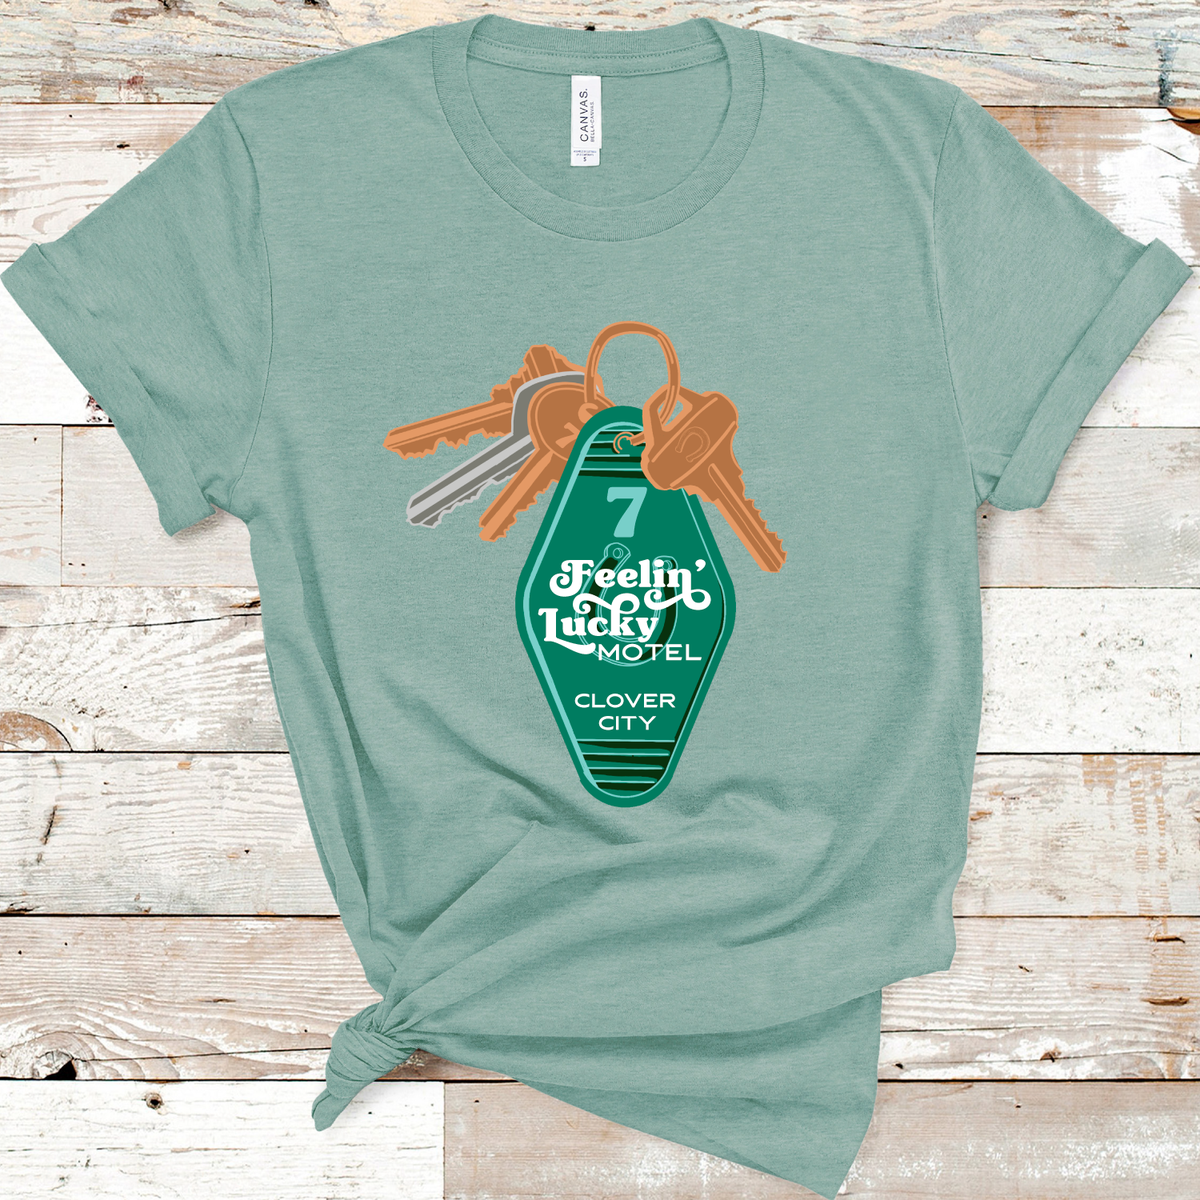 Dusty Blue Tee. A set of keys with a vintage motel key chain. Key chain is green with a number 7 and a horse shoe. There is a retro white font over the horse shoe that says Feelin' Lucky Motel with Clover City underneath. 